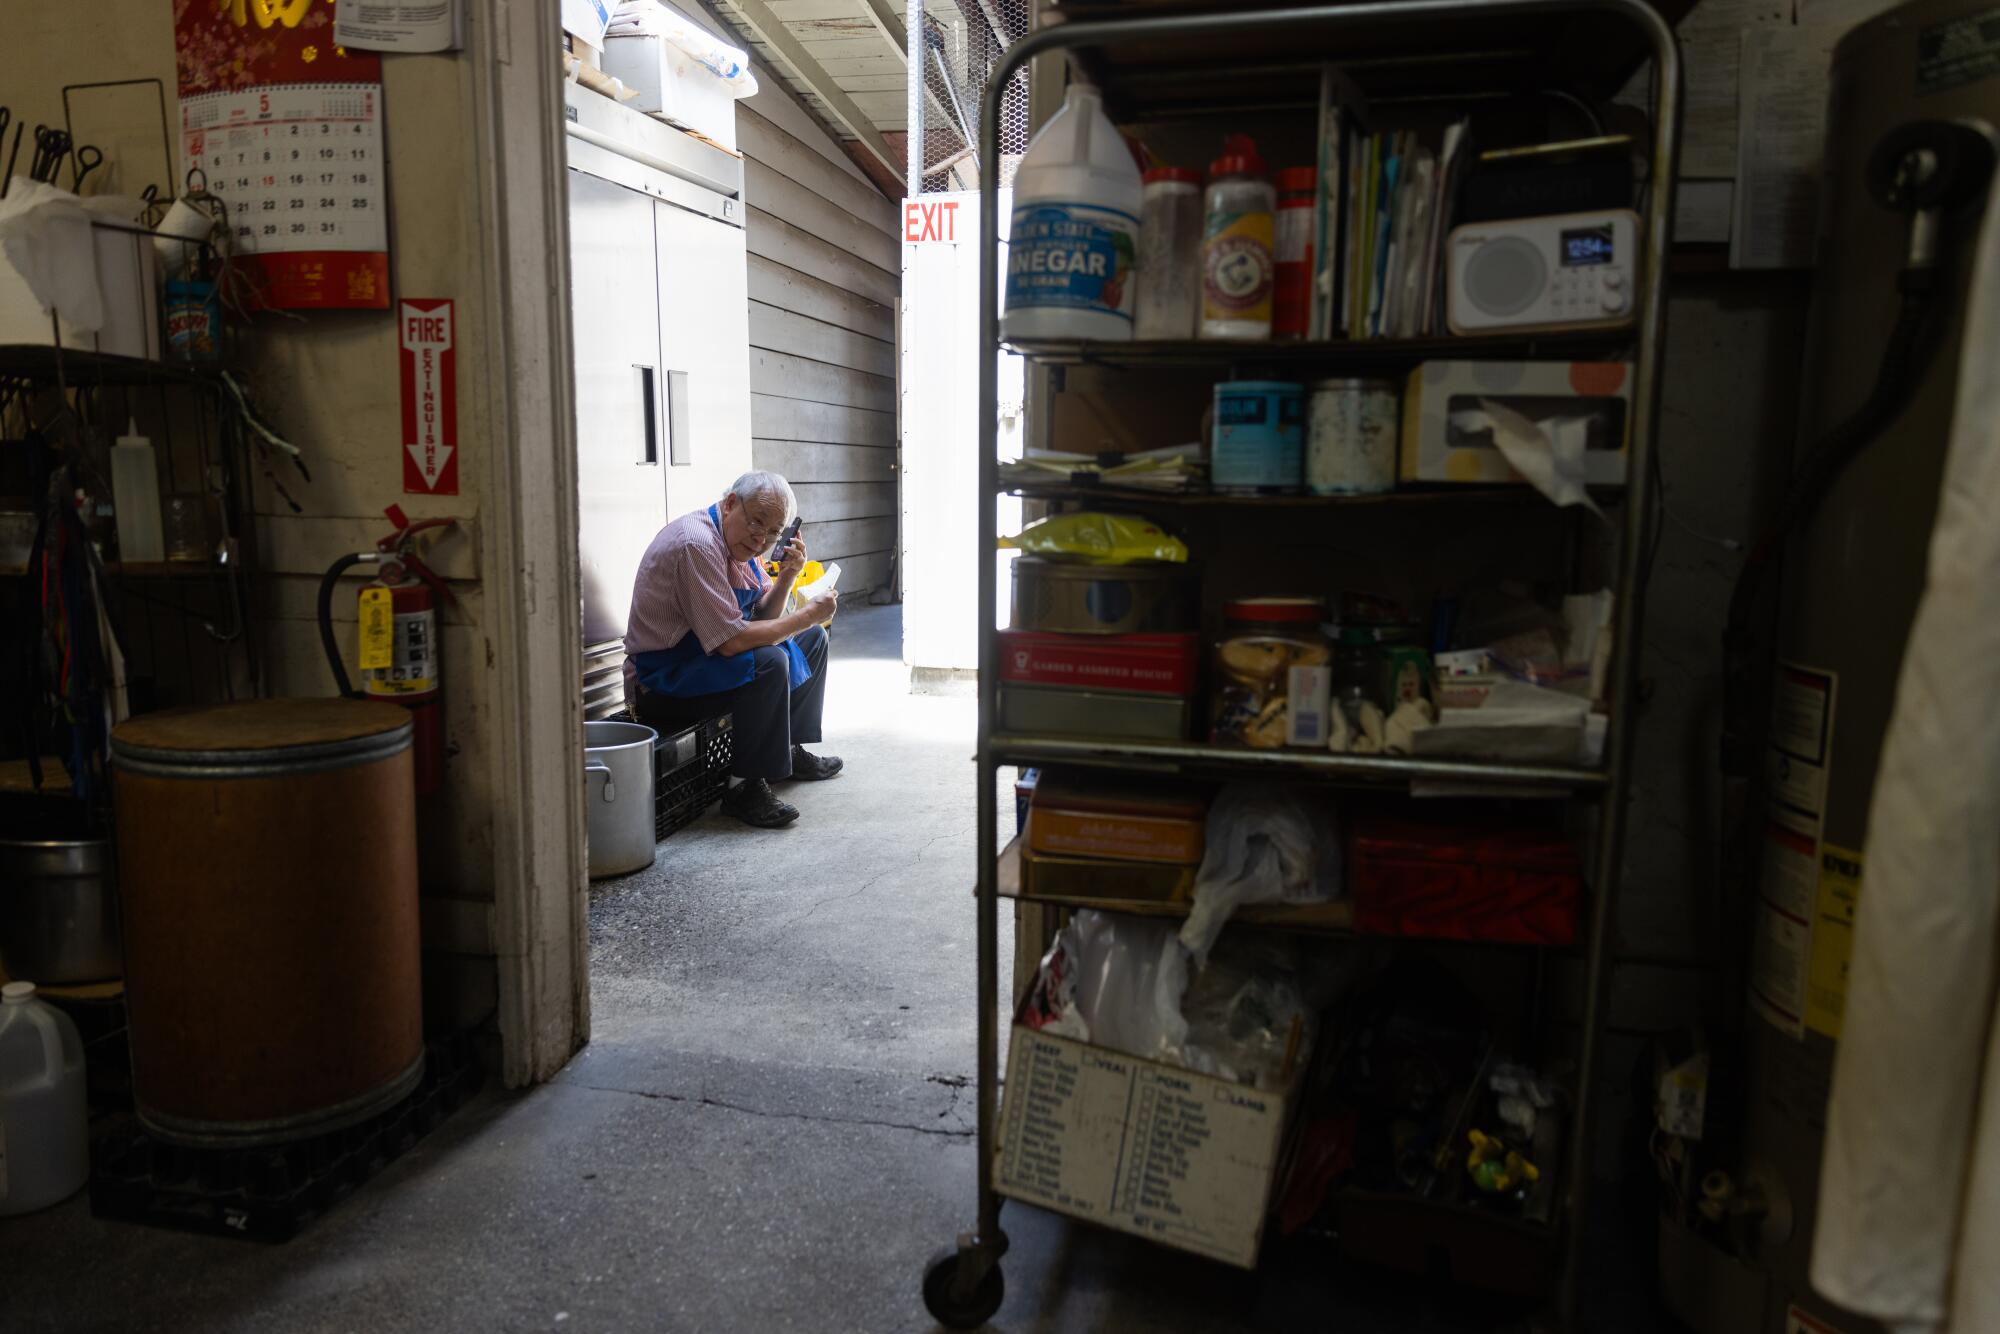 A man sits on a small chest while on his cell phone outside a restaurant kitchen.